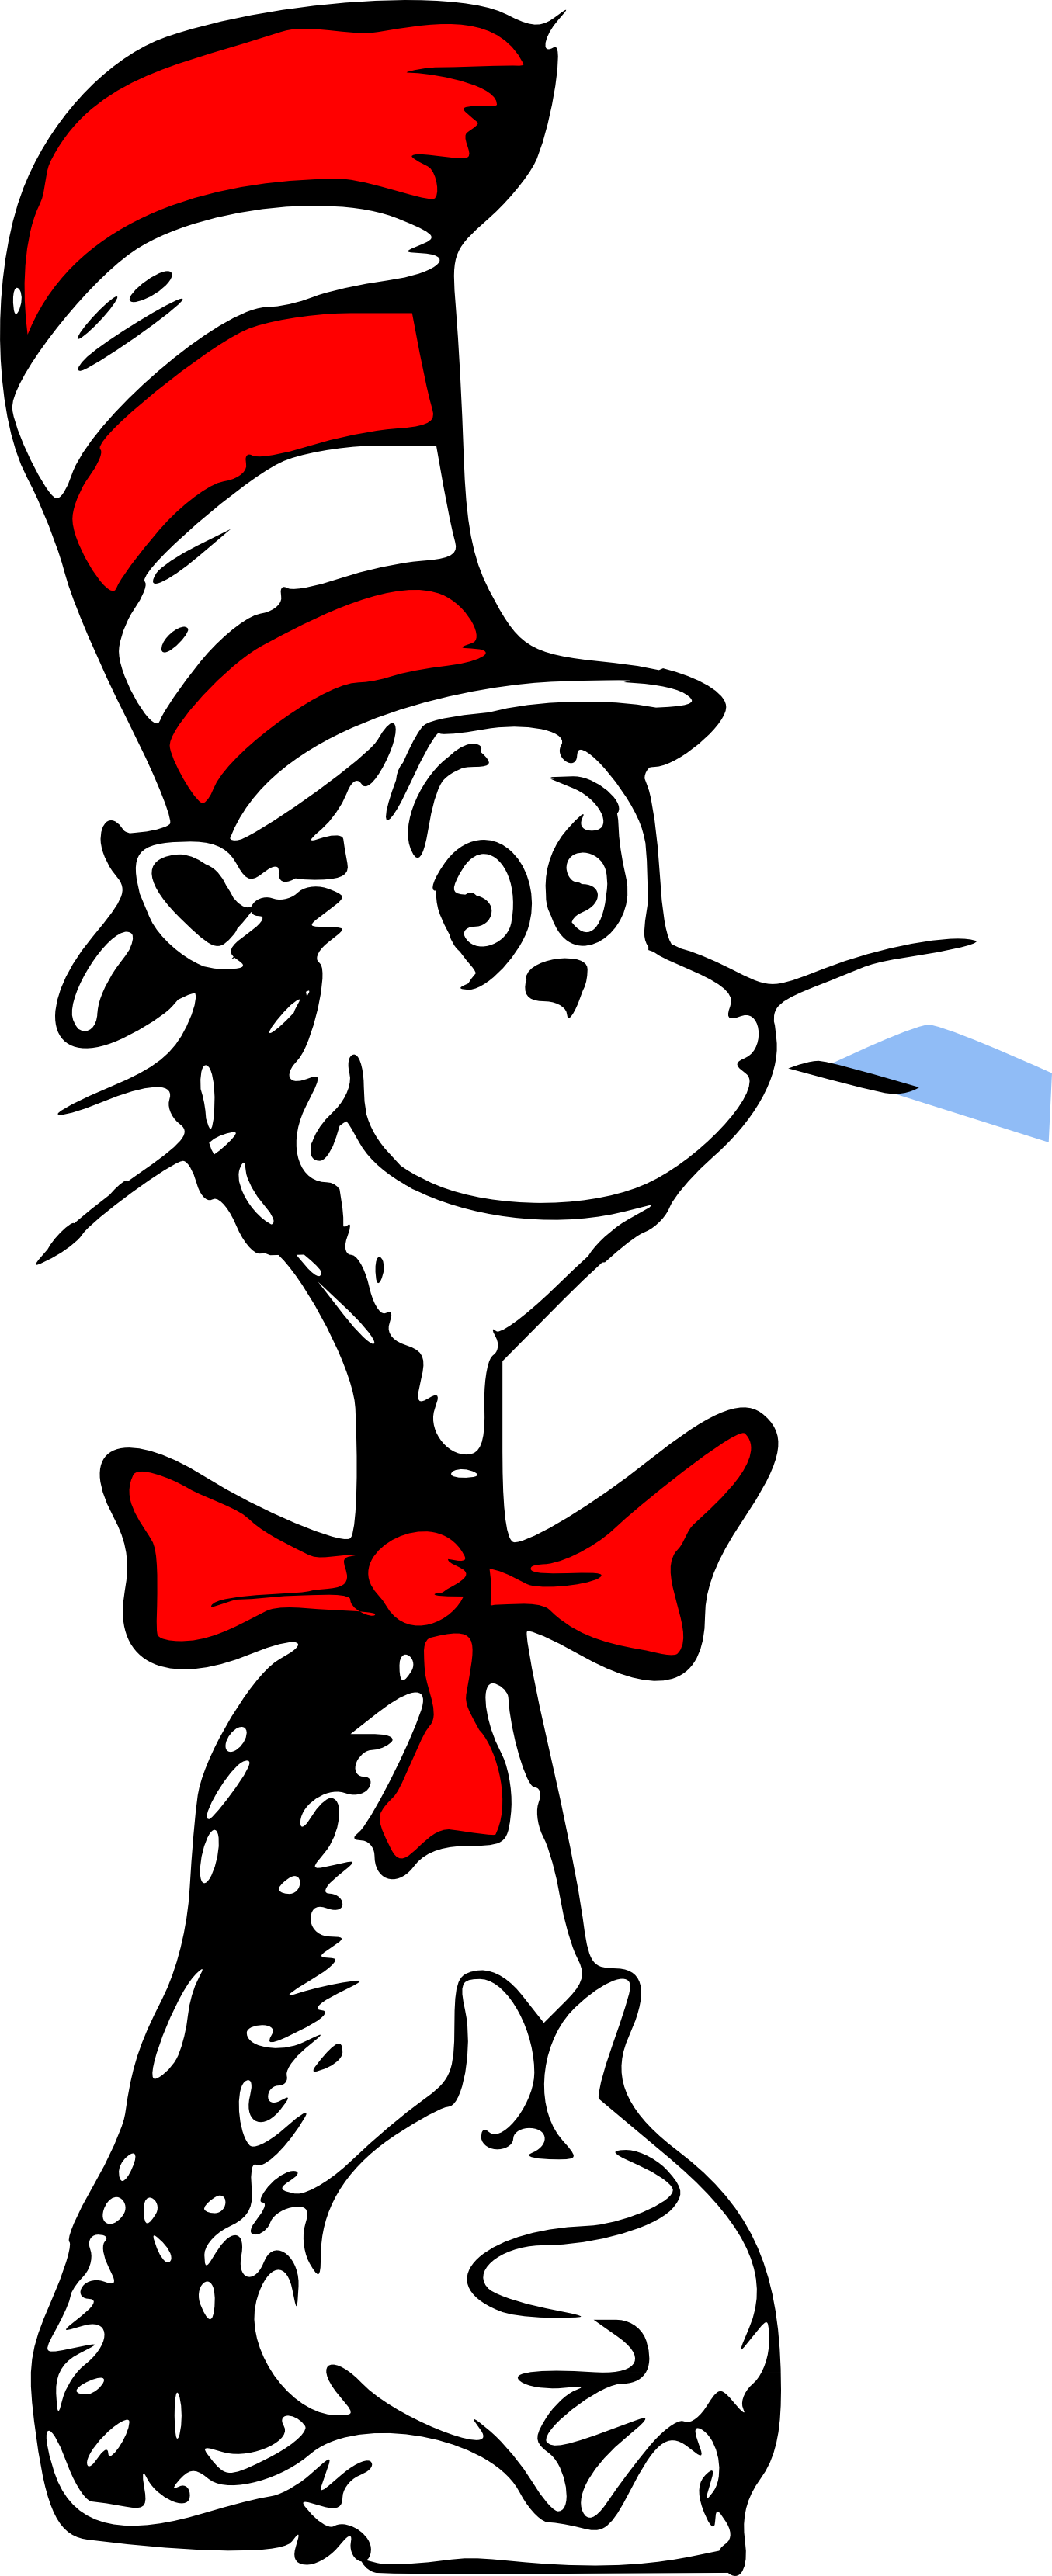 Free Dr Seuss Characters Download Free Dr Seuss Chara - Vrogue.co